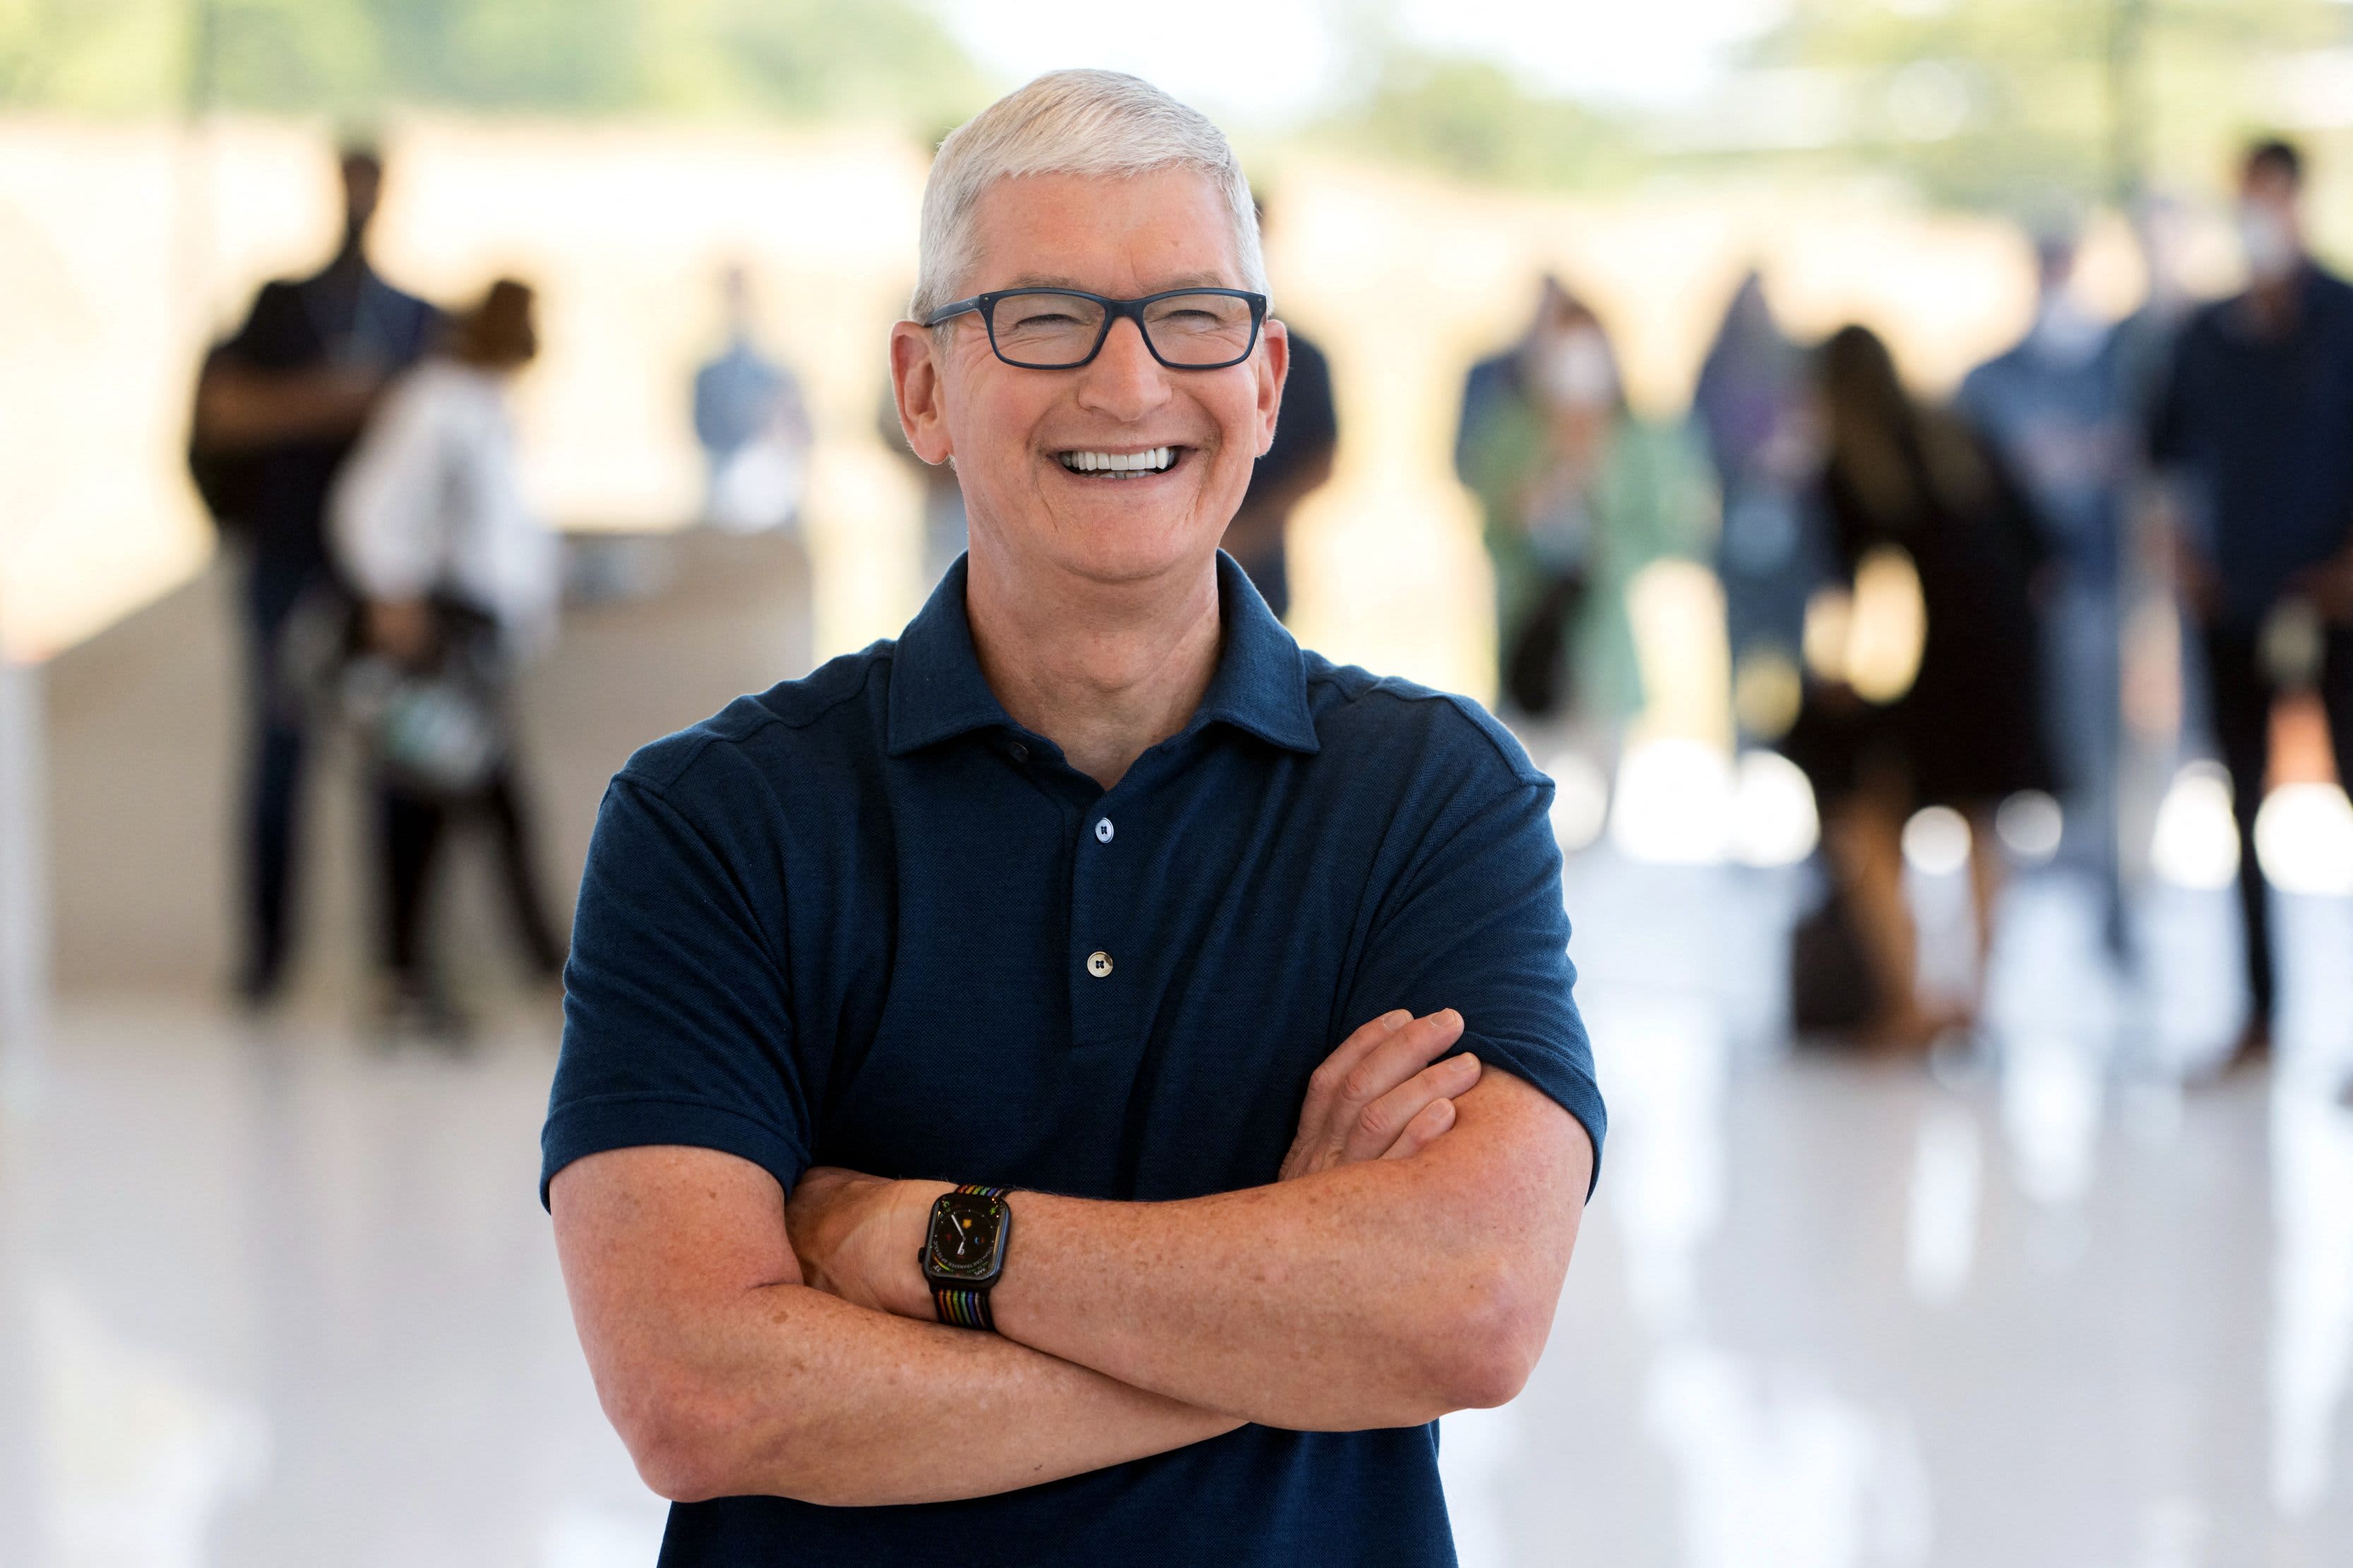 Apple CEO Tim Cook Explains Why People Might Want a Mixed Reality Headset